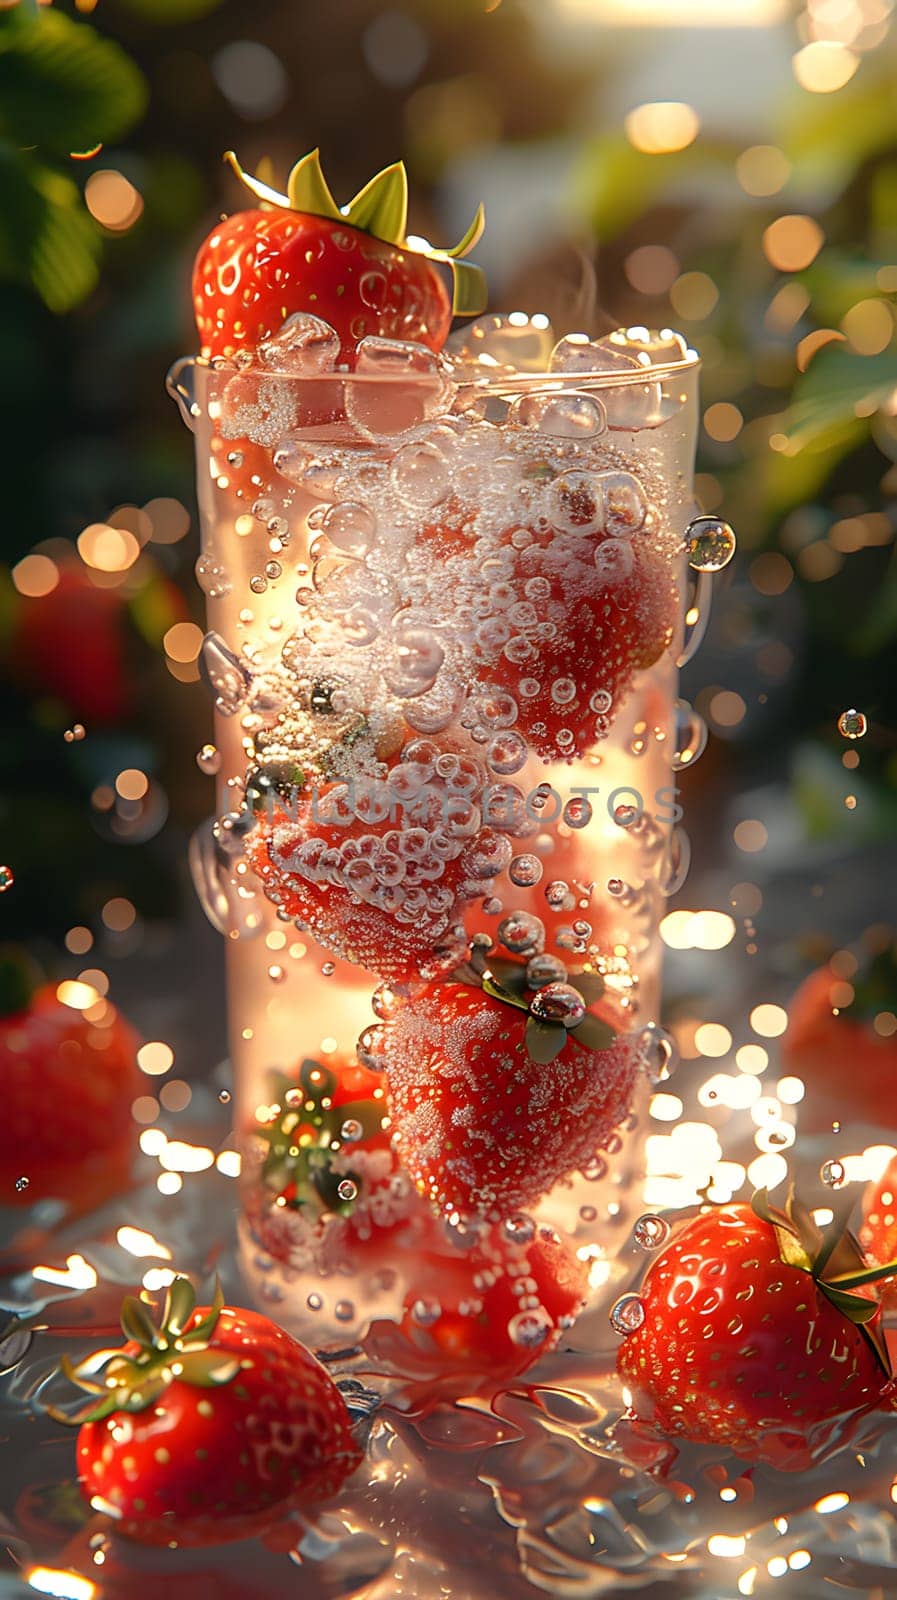 Berries from a terrestrial plant are plunging into a glass of water with bubbles, resembling a Christmas ornament. A perfect ingredient for a festive recipe